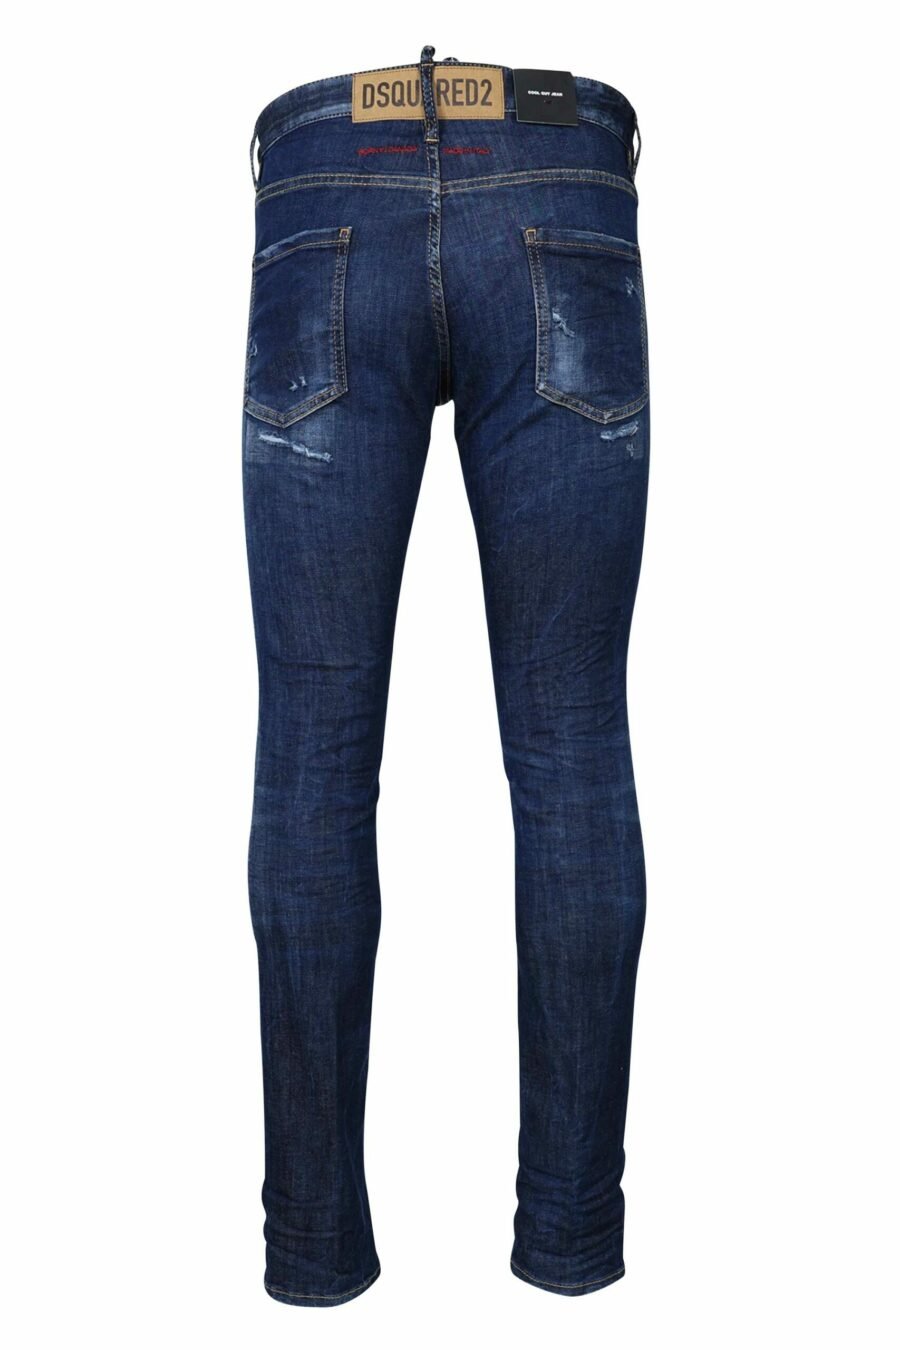 Cool guy jeans blue semi-worn - 8054148105396 2 scaled